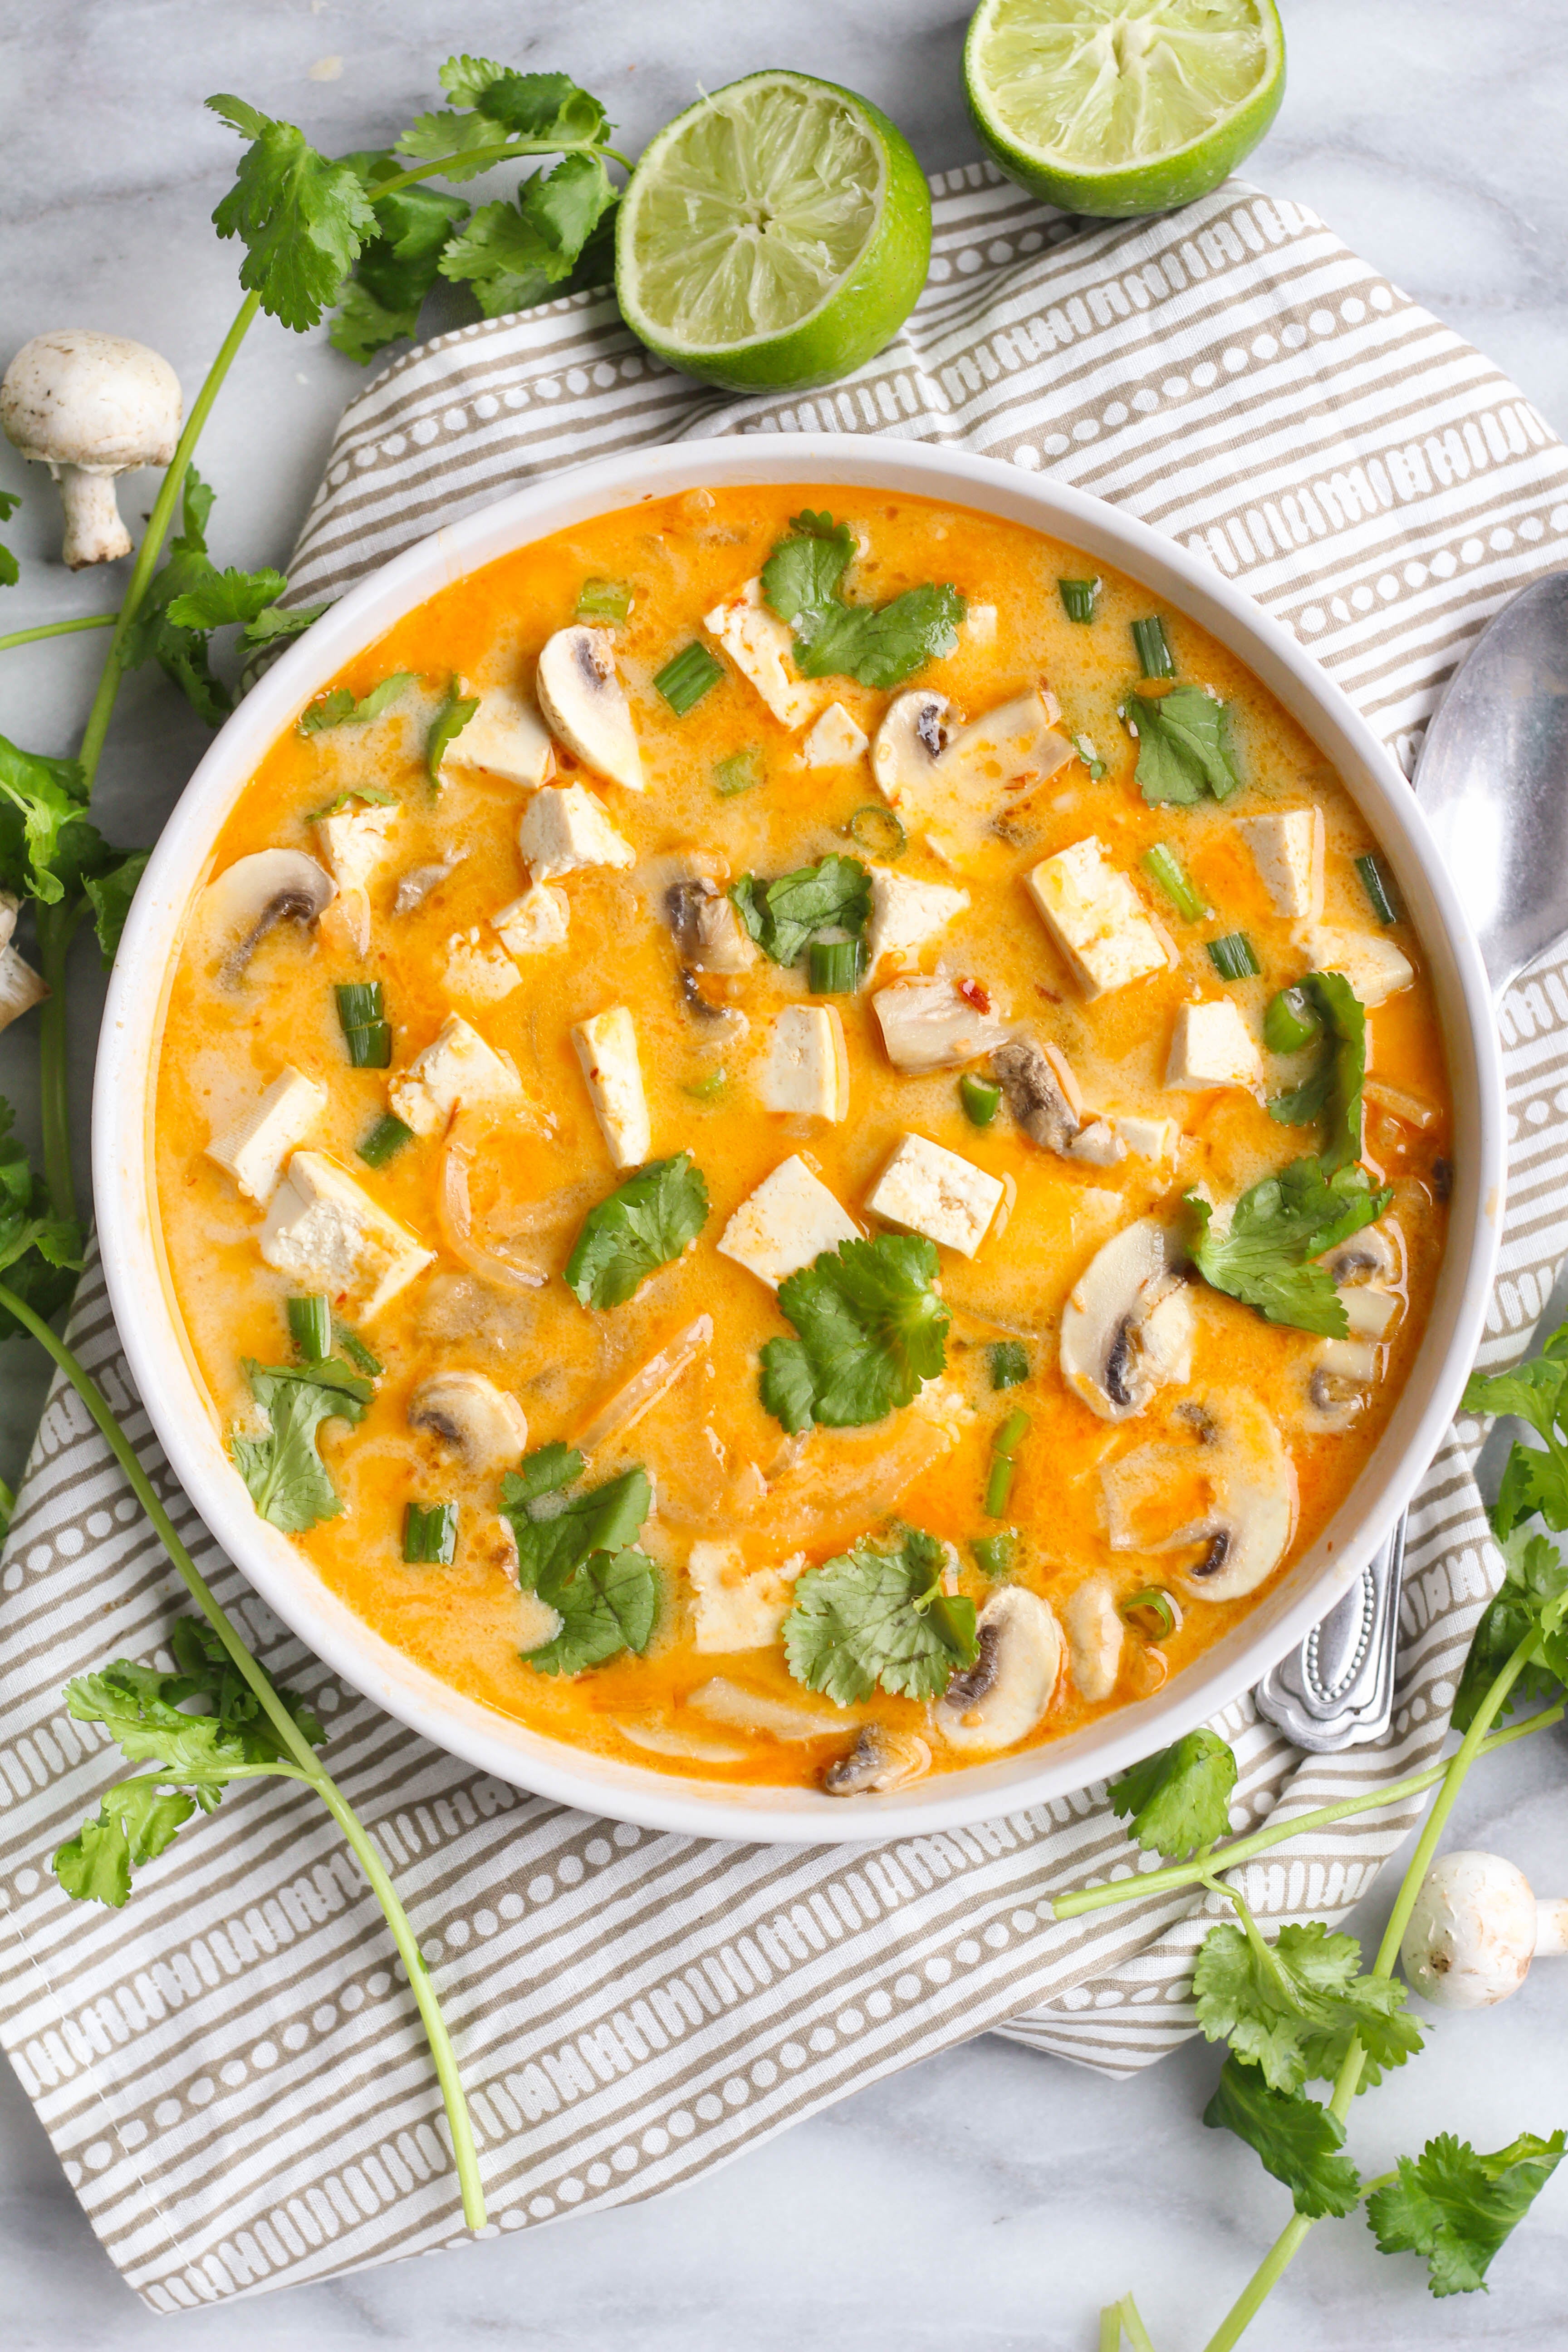 Spicy Thai Coconut Soup (Tom Kha) with Chicken or Tofu - Zen & Spice